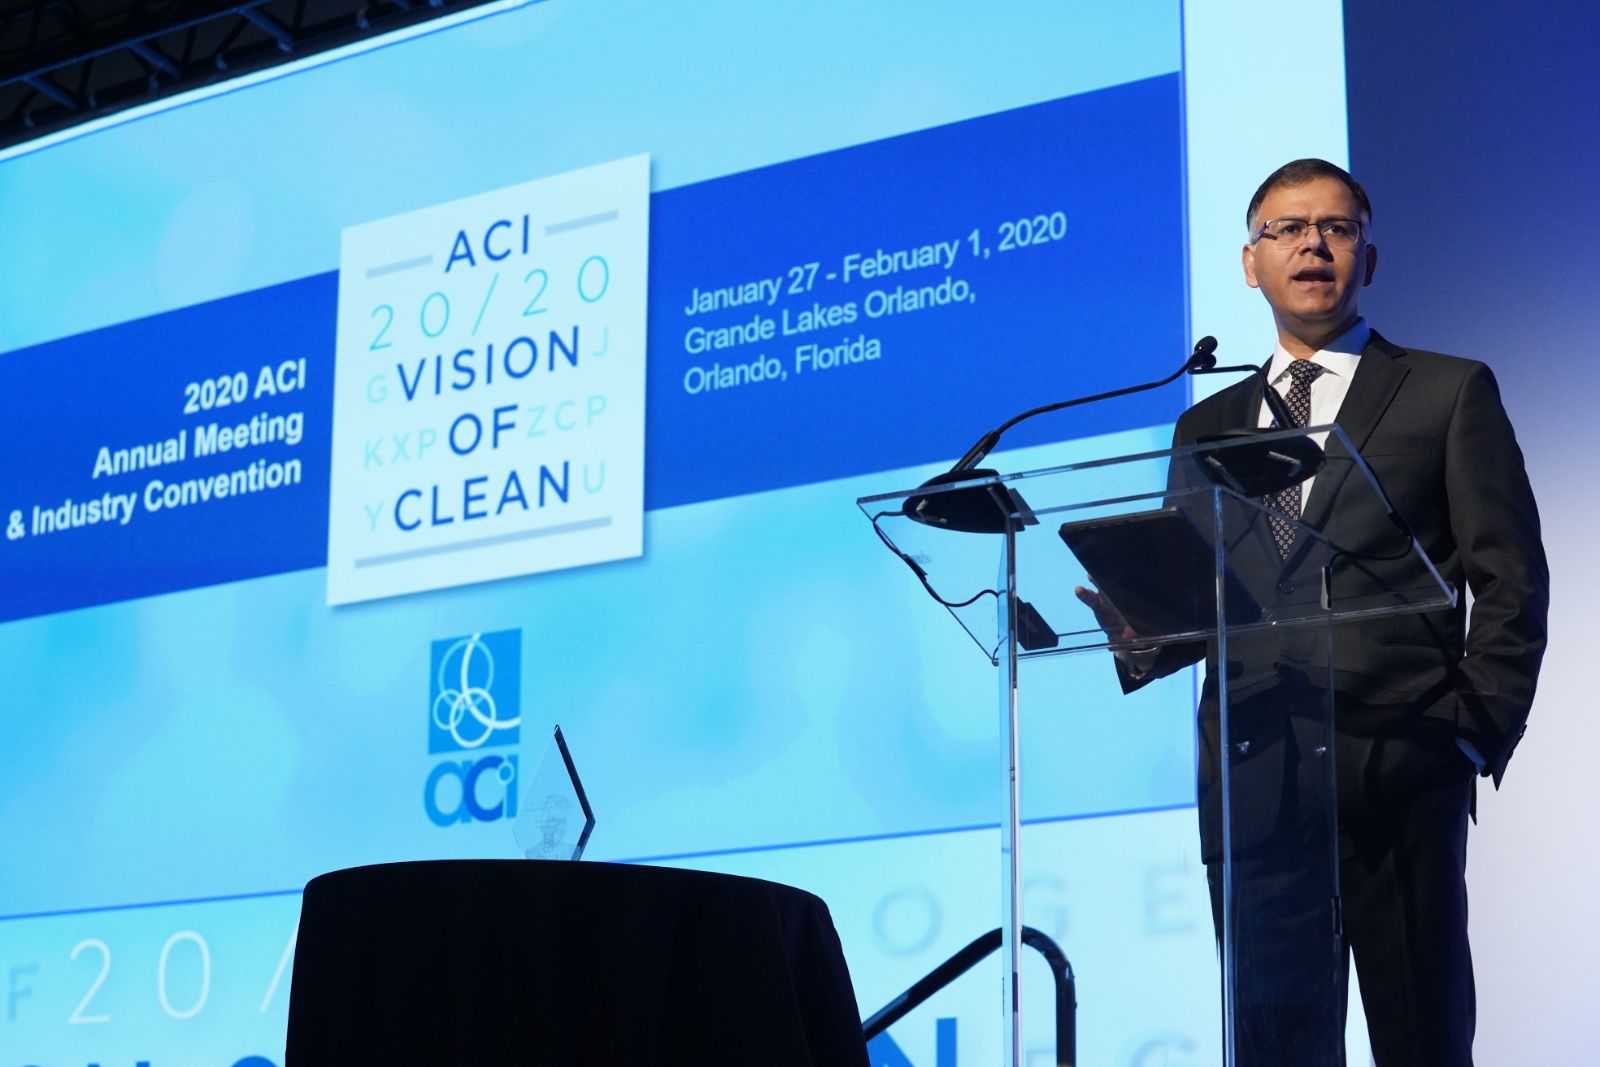 2020 ACI Annual Meeting & Industry Convention The American Cleaning